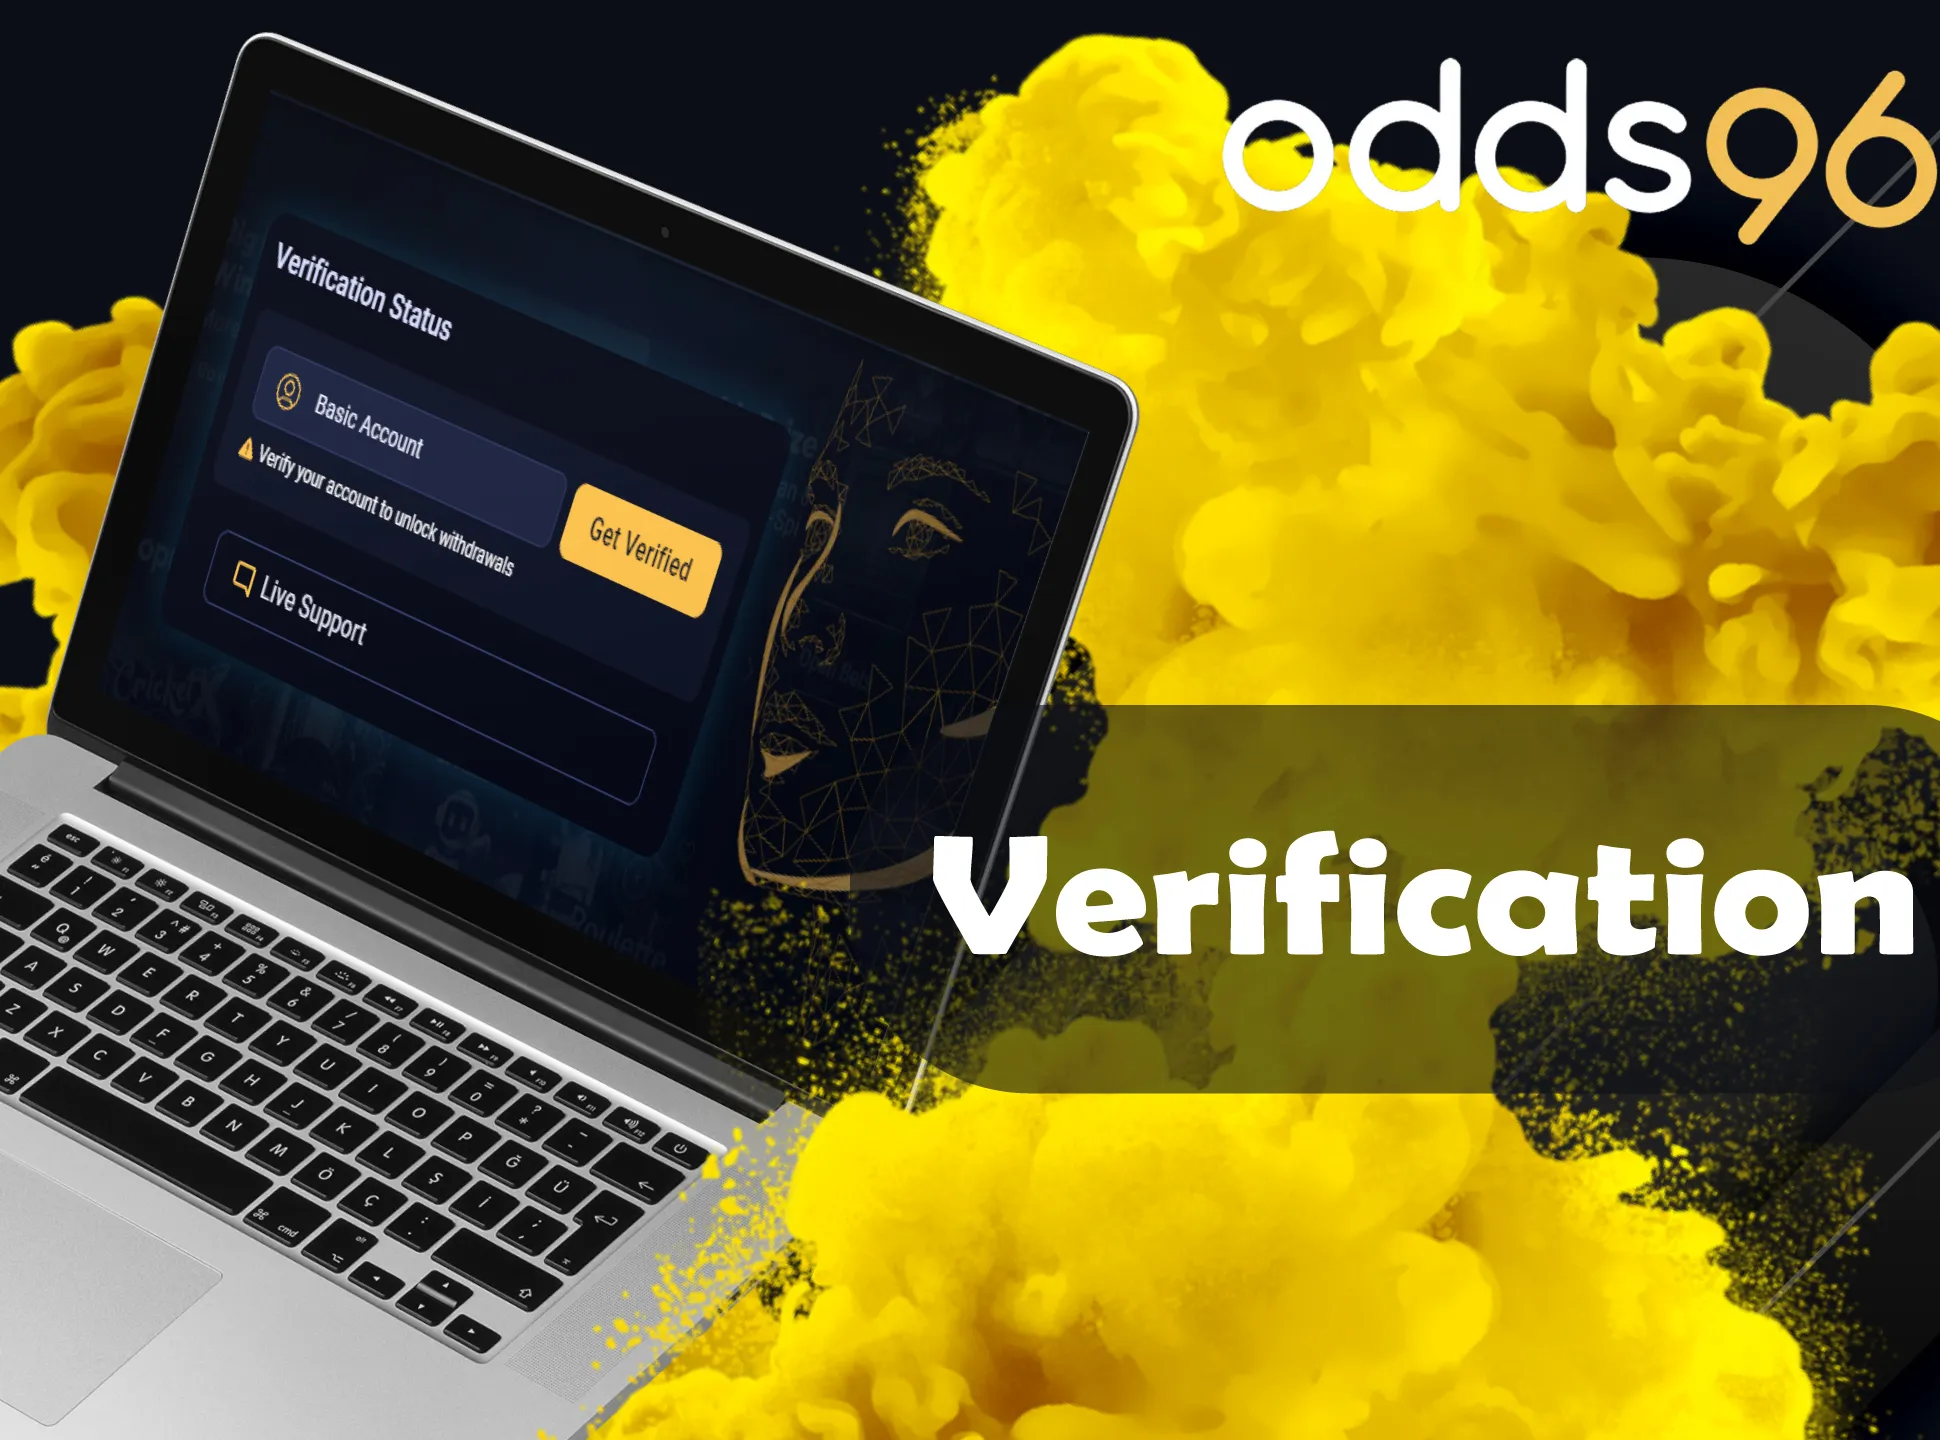 Verify your Odds96 account for start betting.